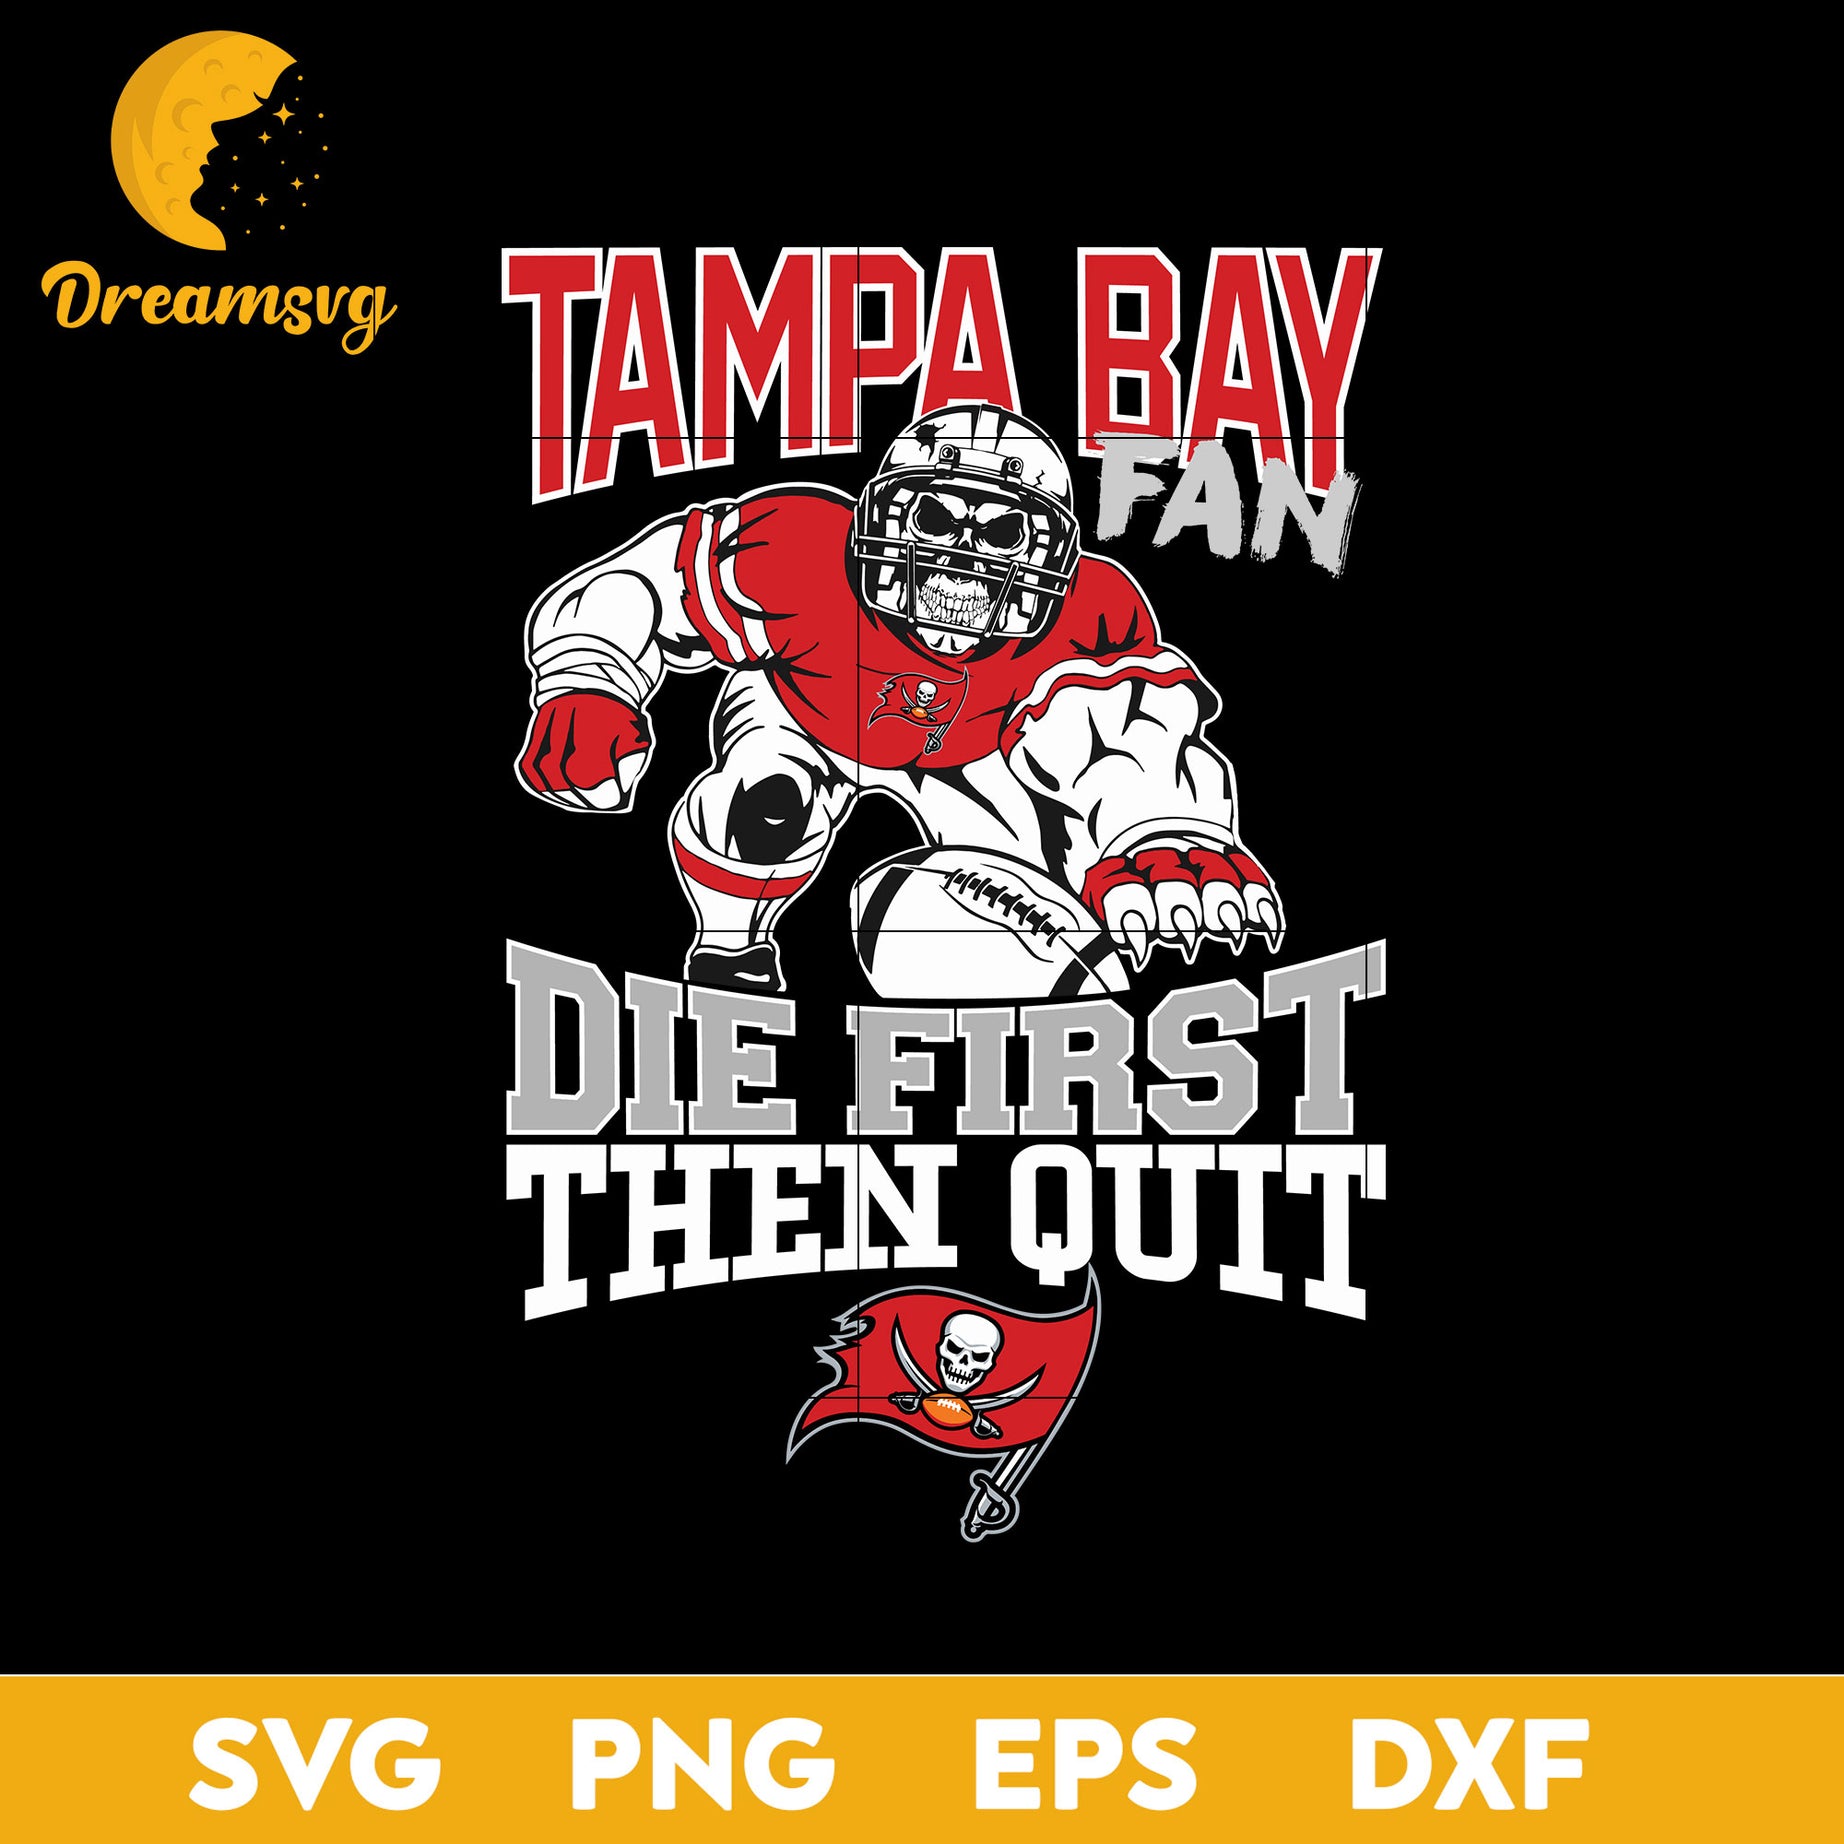 Tampa Bay Buccaneers Fan Die First Then Quit Svg, Tampa Bay Buccaneers Svg  Png, Dxf, Eps file.